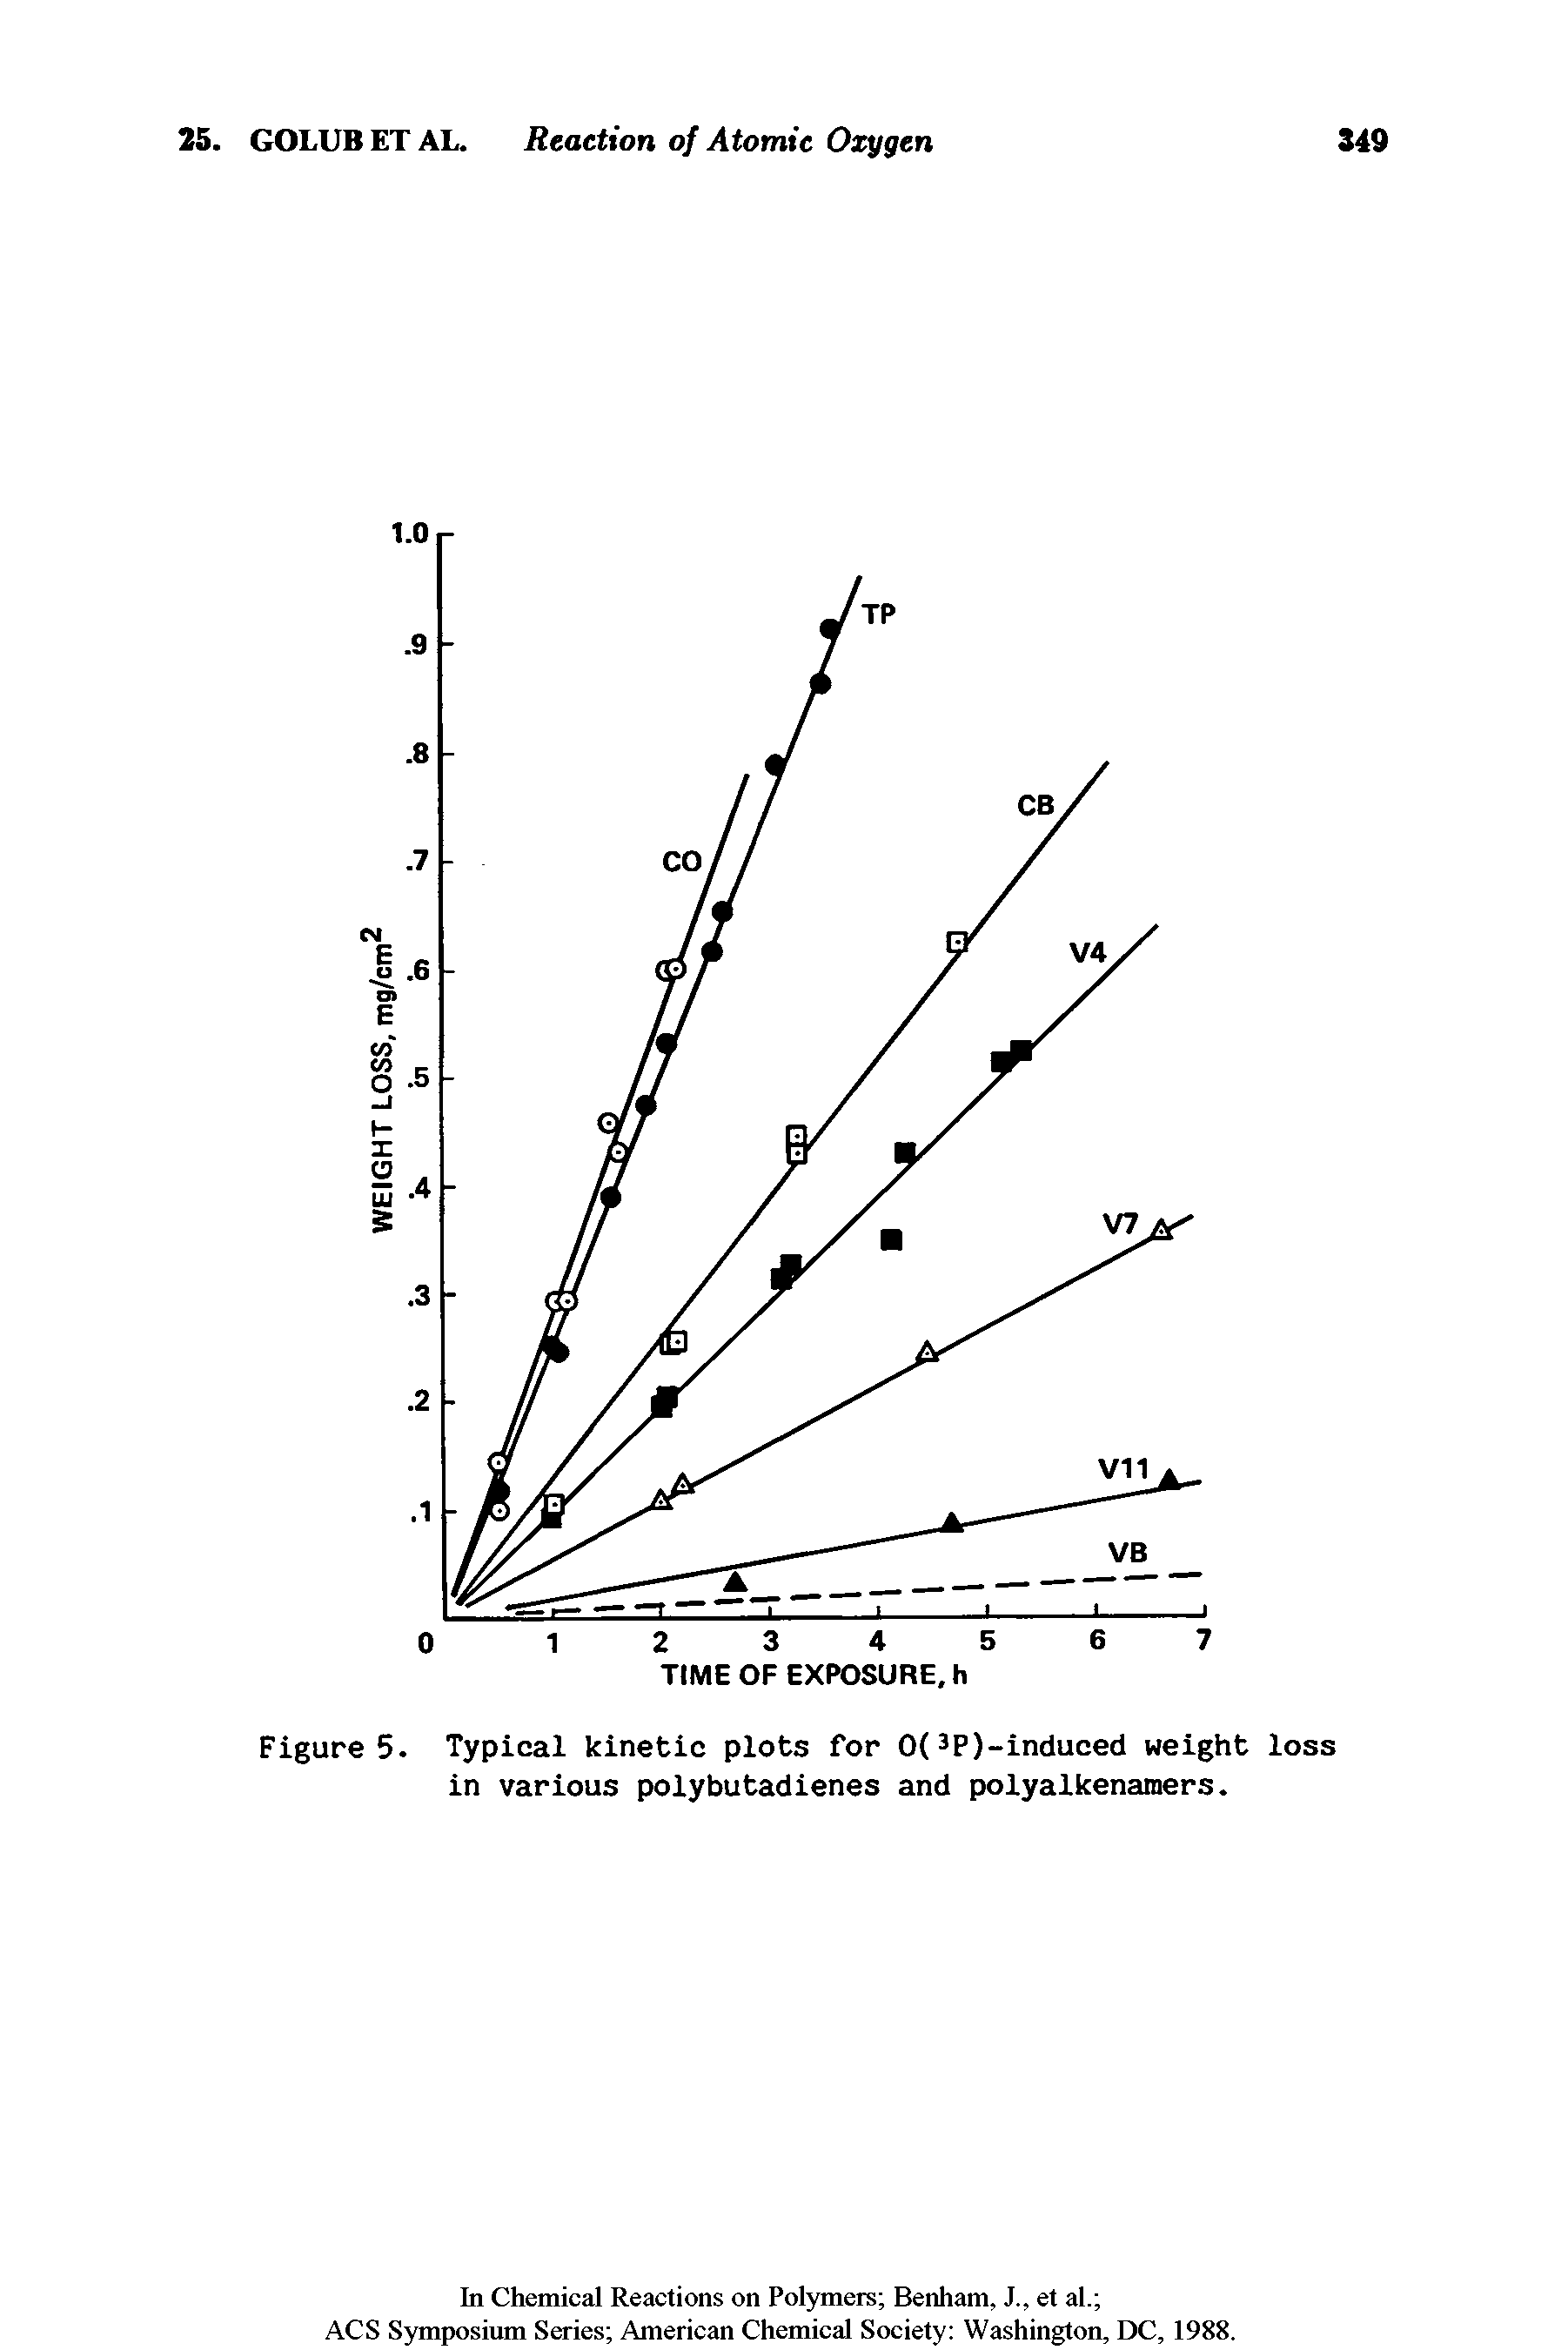 Figure 5. Typical kinetic plots for 0(3P)-induced weight loss in various polybutadienes and polyalkenamers.